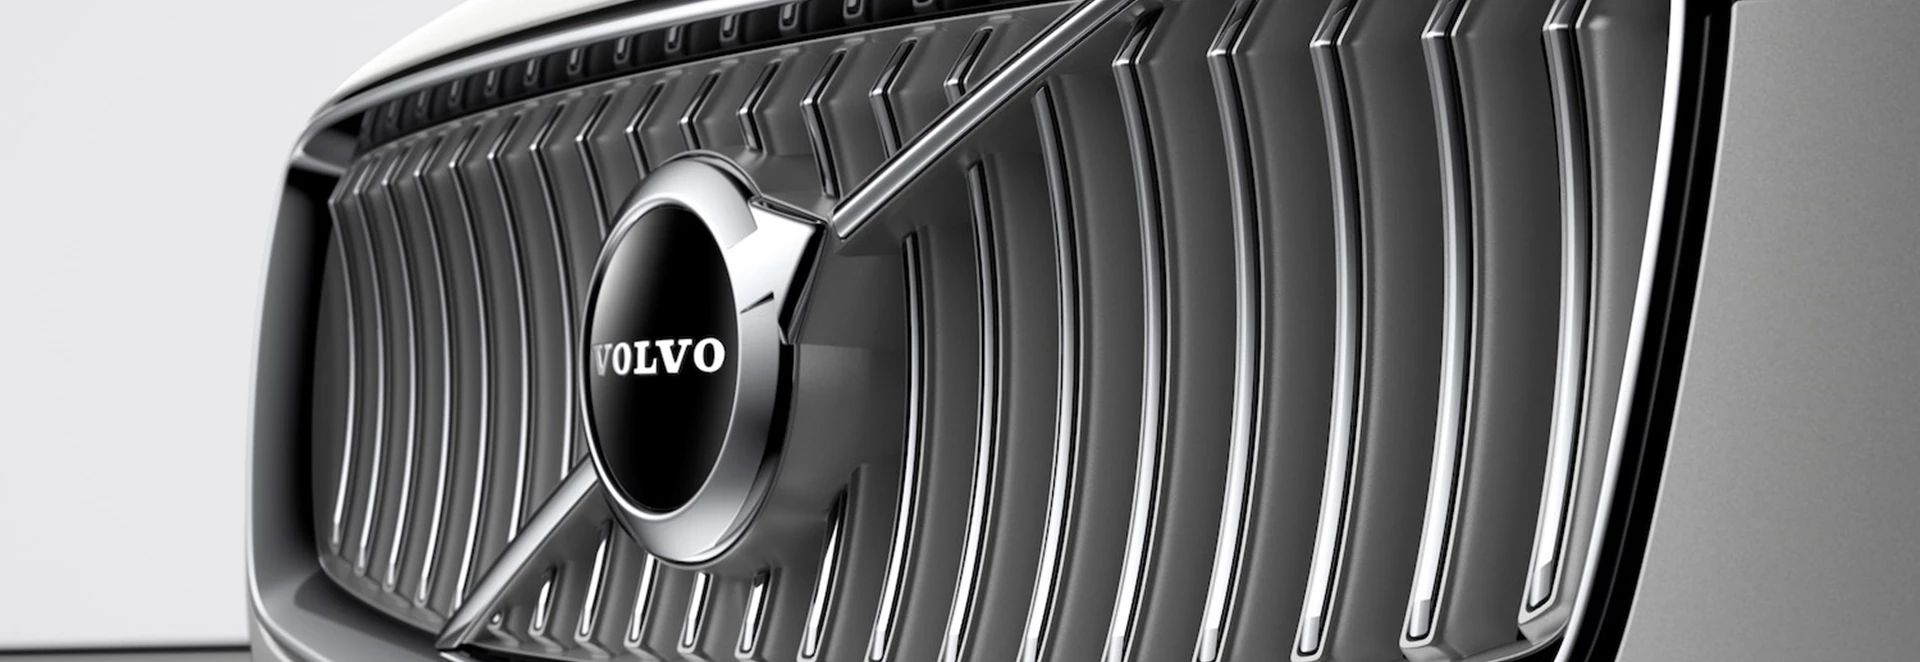 Volvo to fit cameras and sensors to vehicles in effort to prevent drink driving 